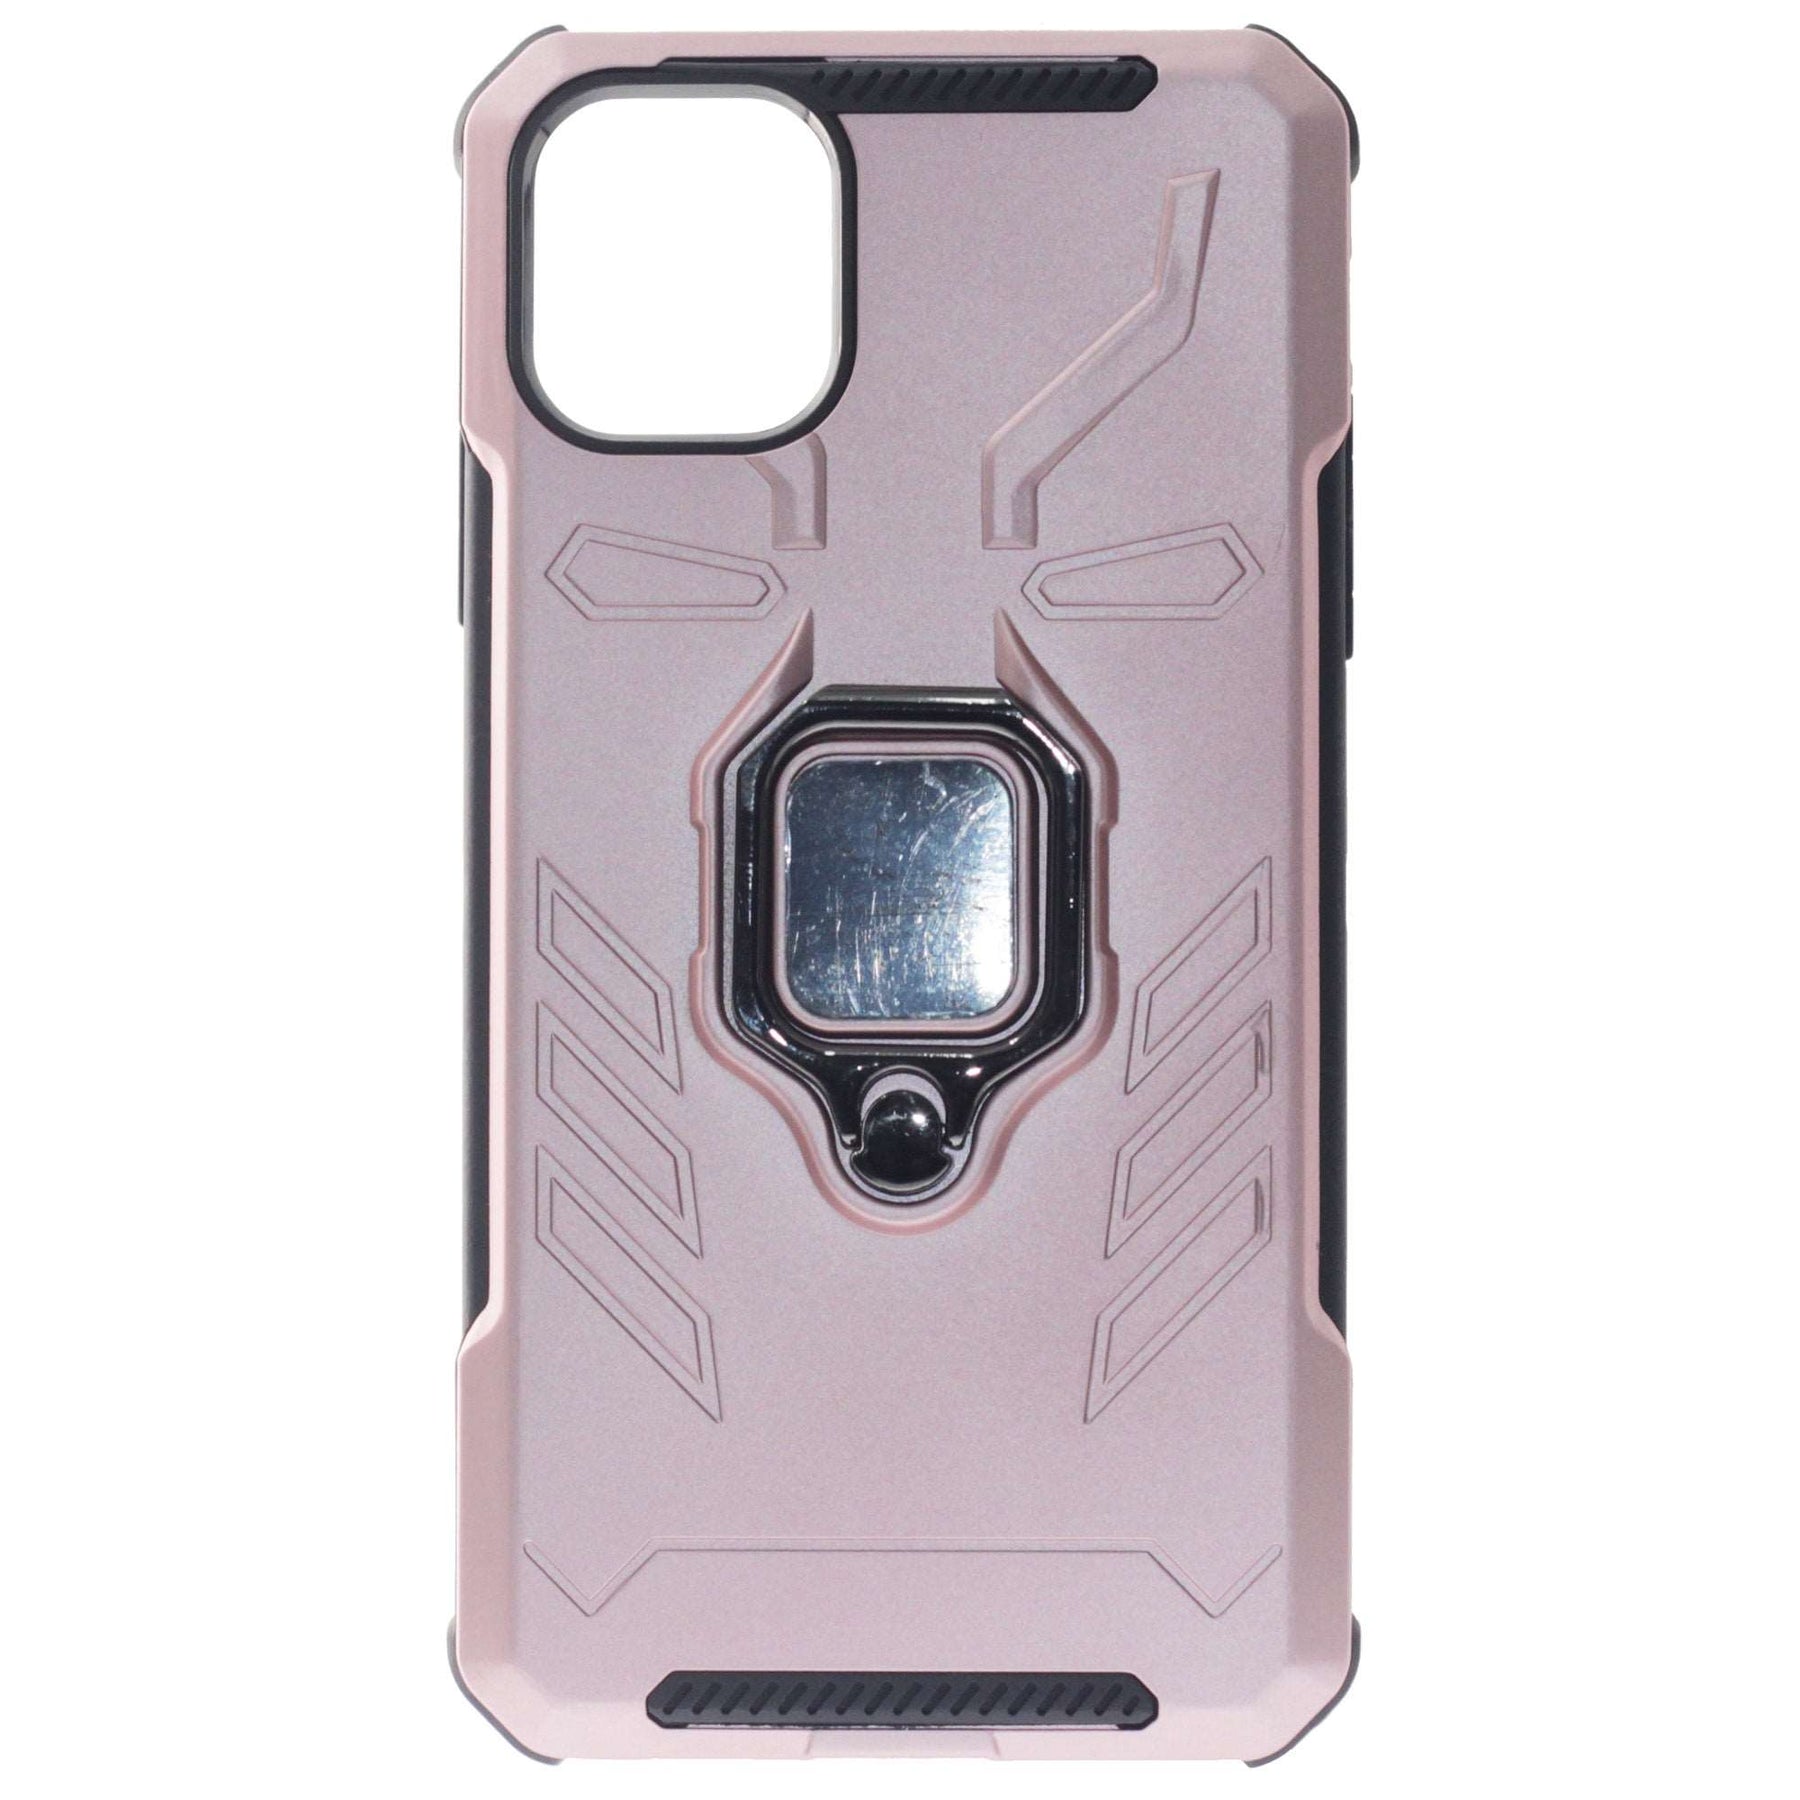 Apple iPhone 11 Case, Ring Armor Phone Case, Color Rose Gold.